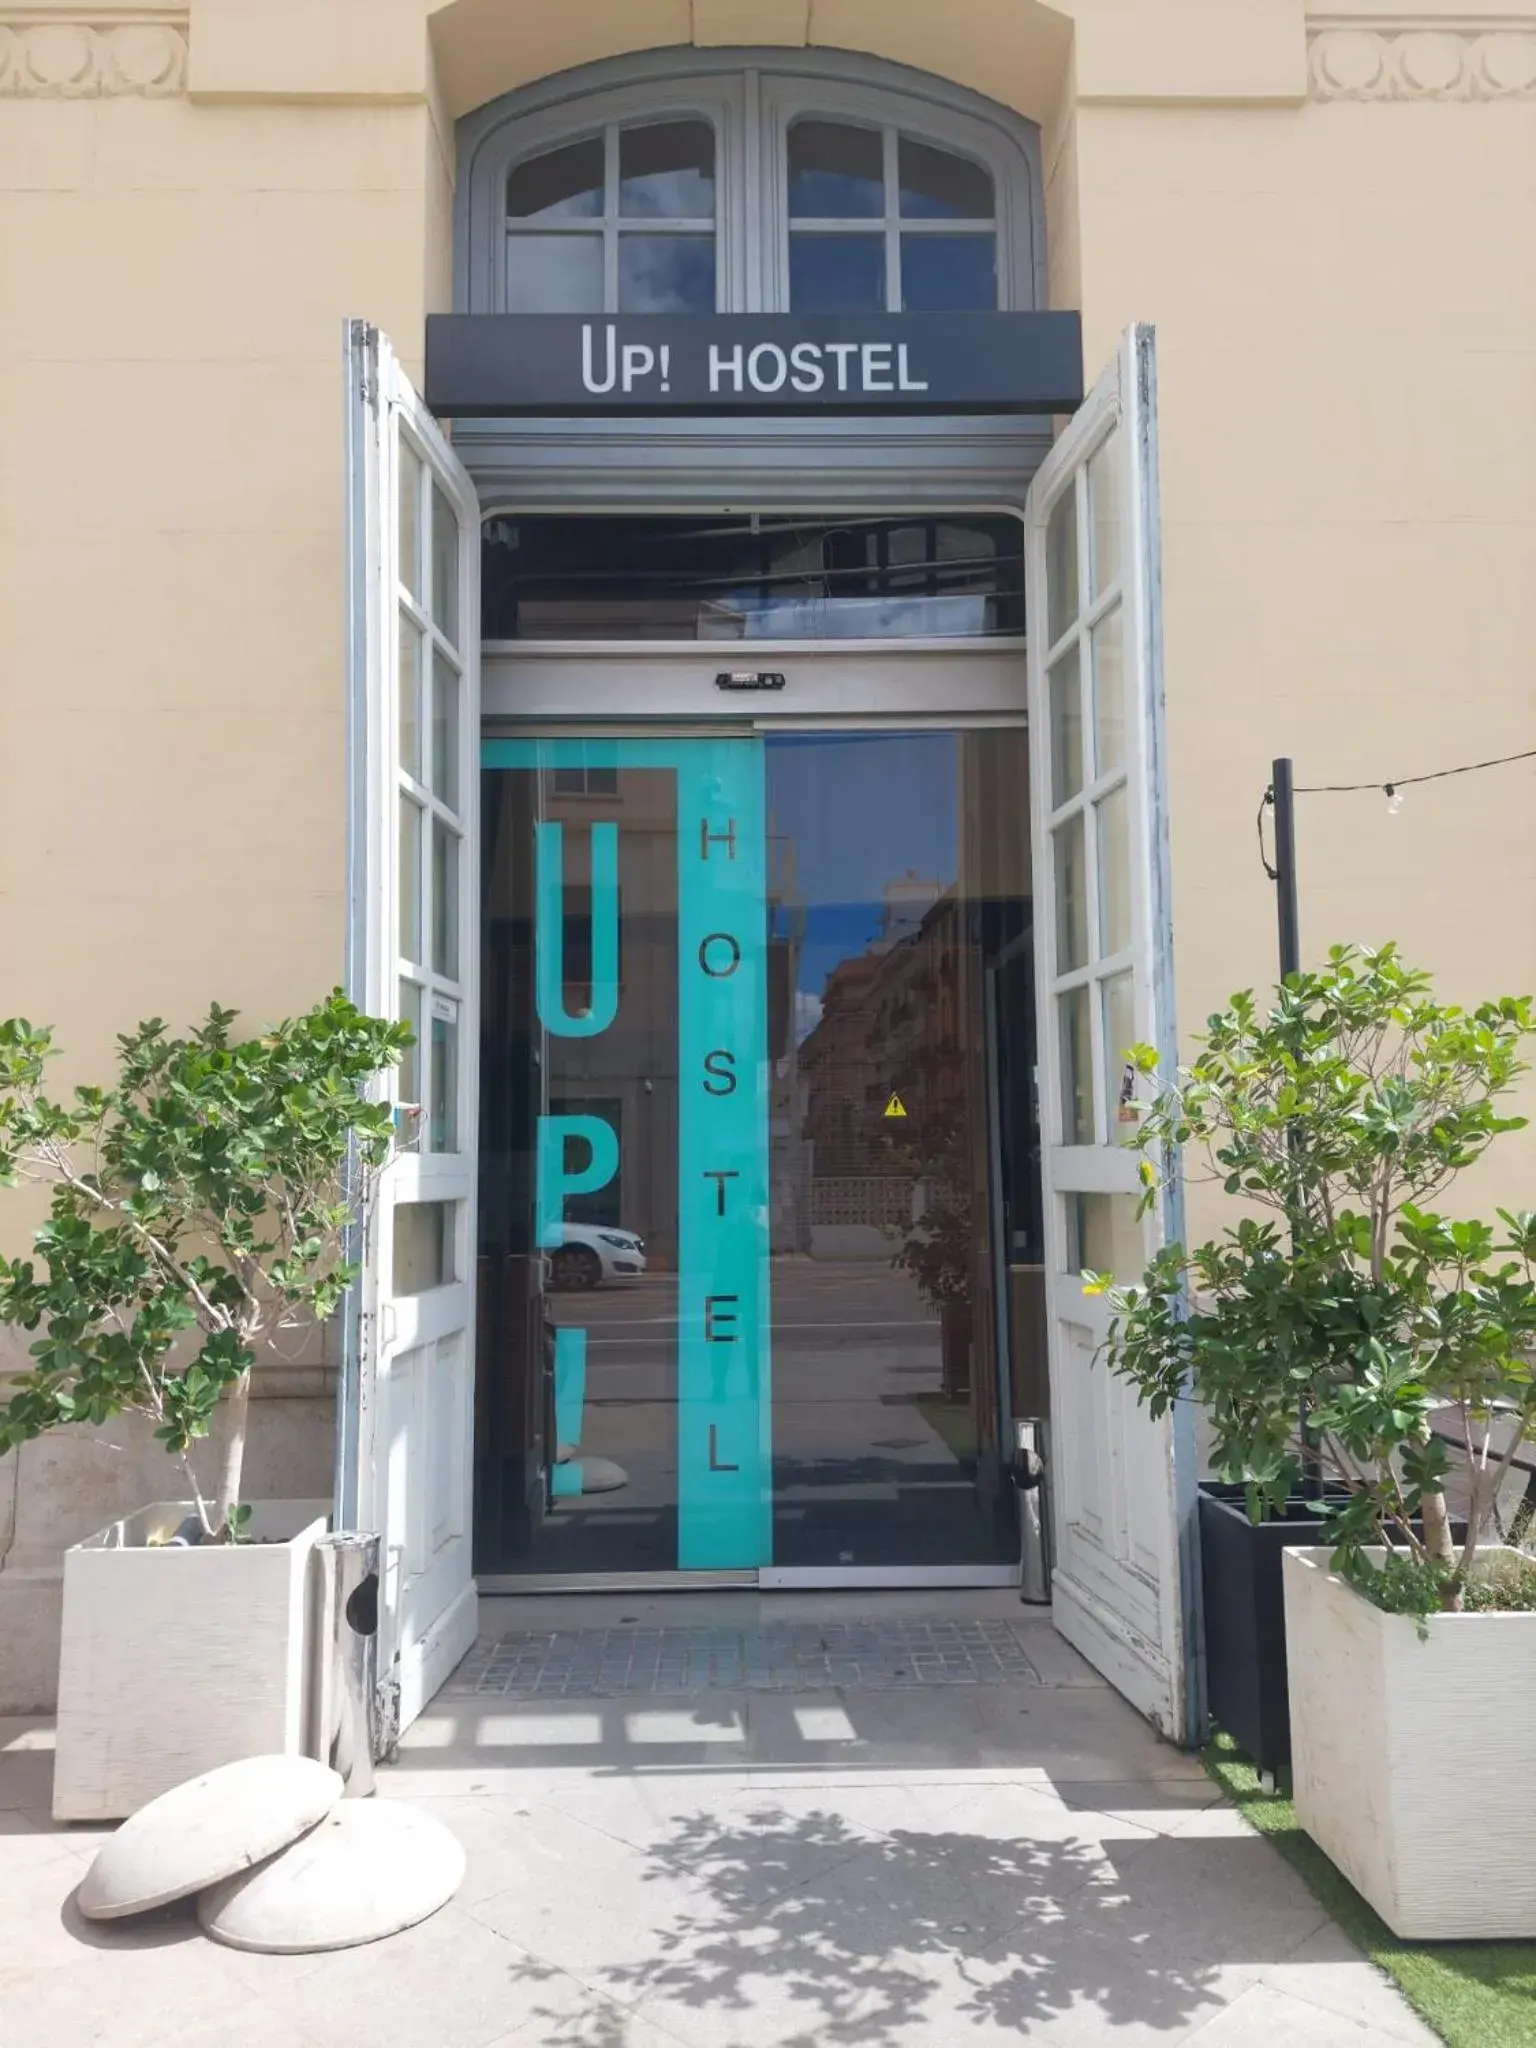 Property Building in UP Hostel Valencia